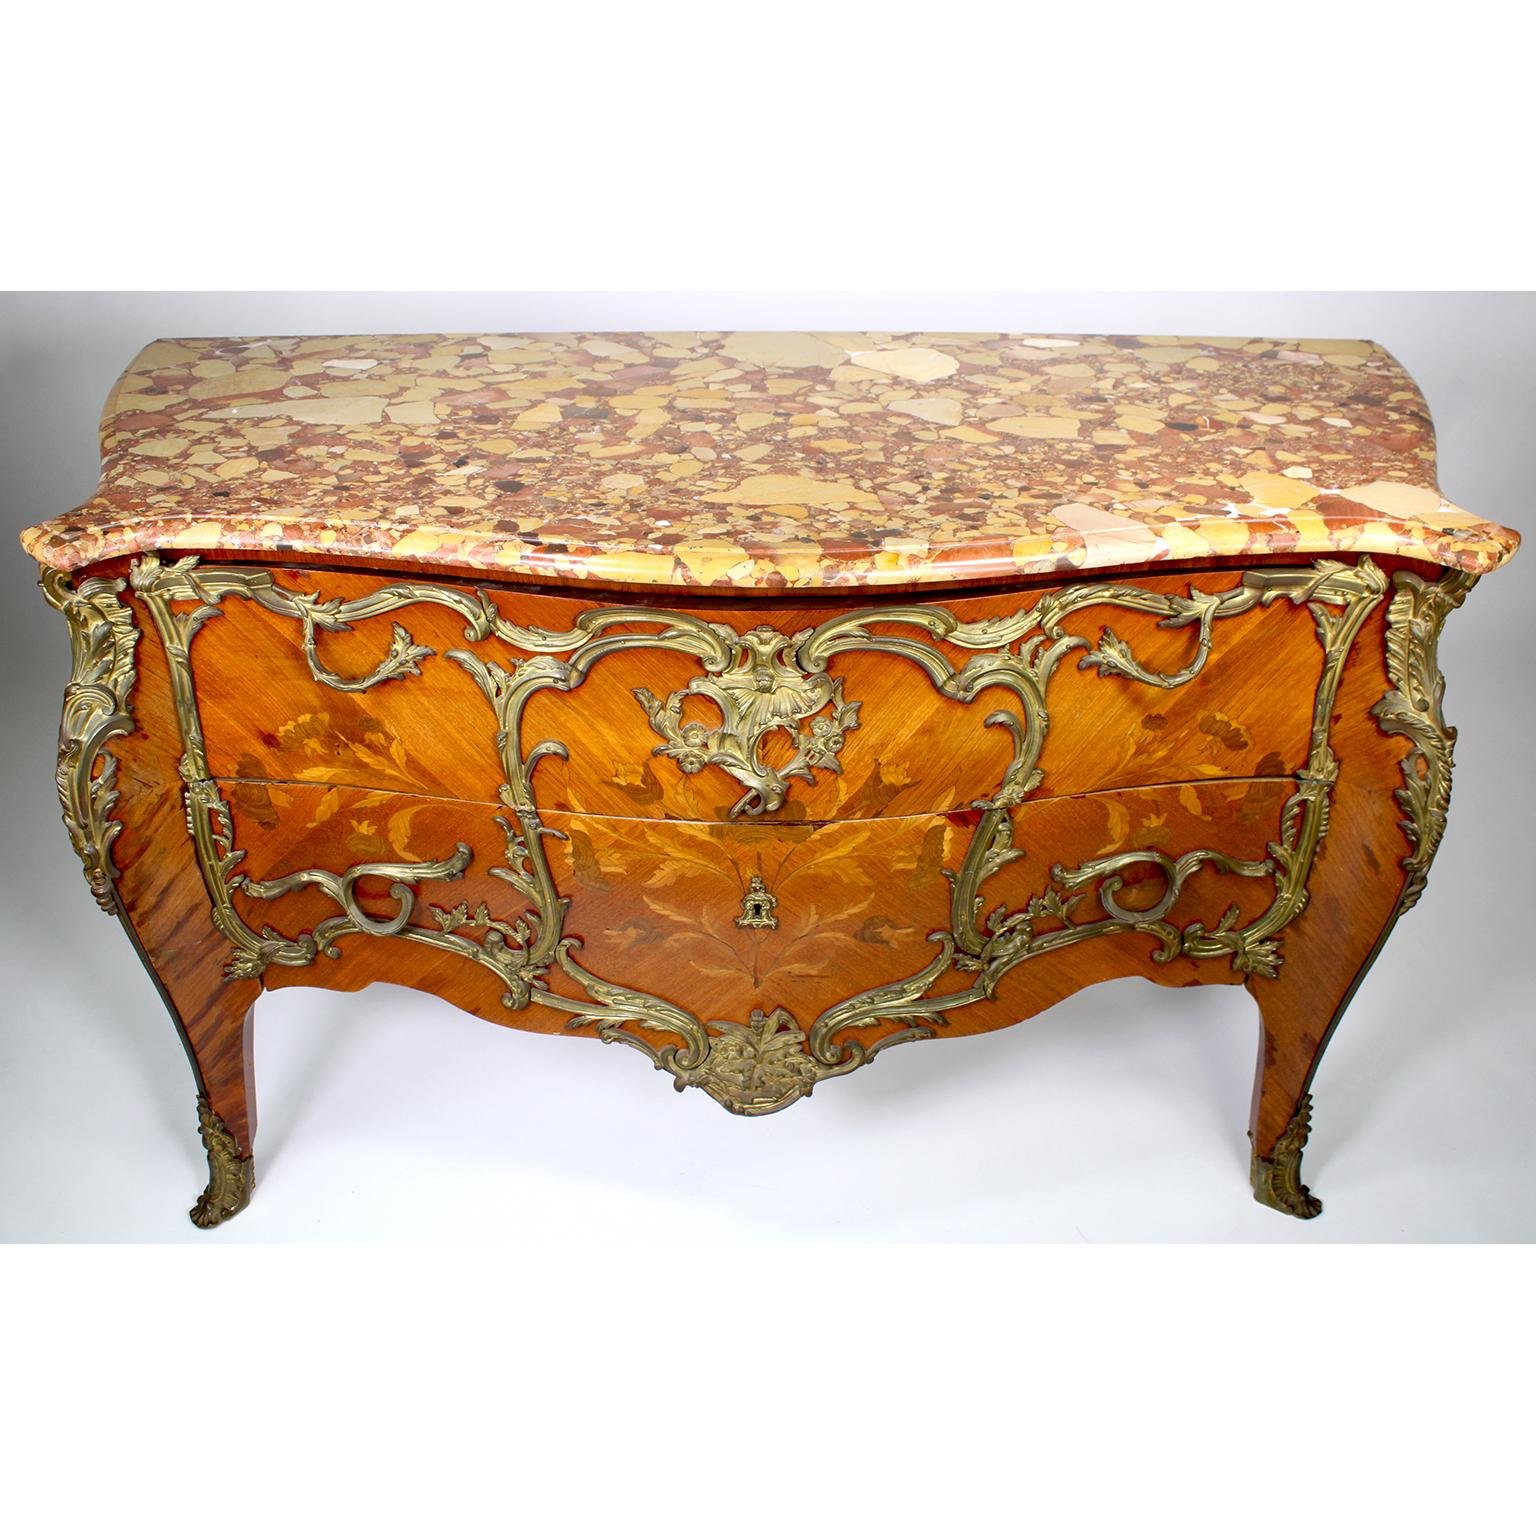 Cast French 19th/20th Century Louis XV Style Gilt-Bronze Mounted Commode Marble Top For Sale